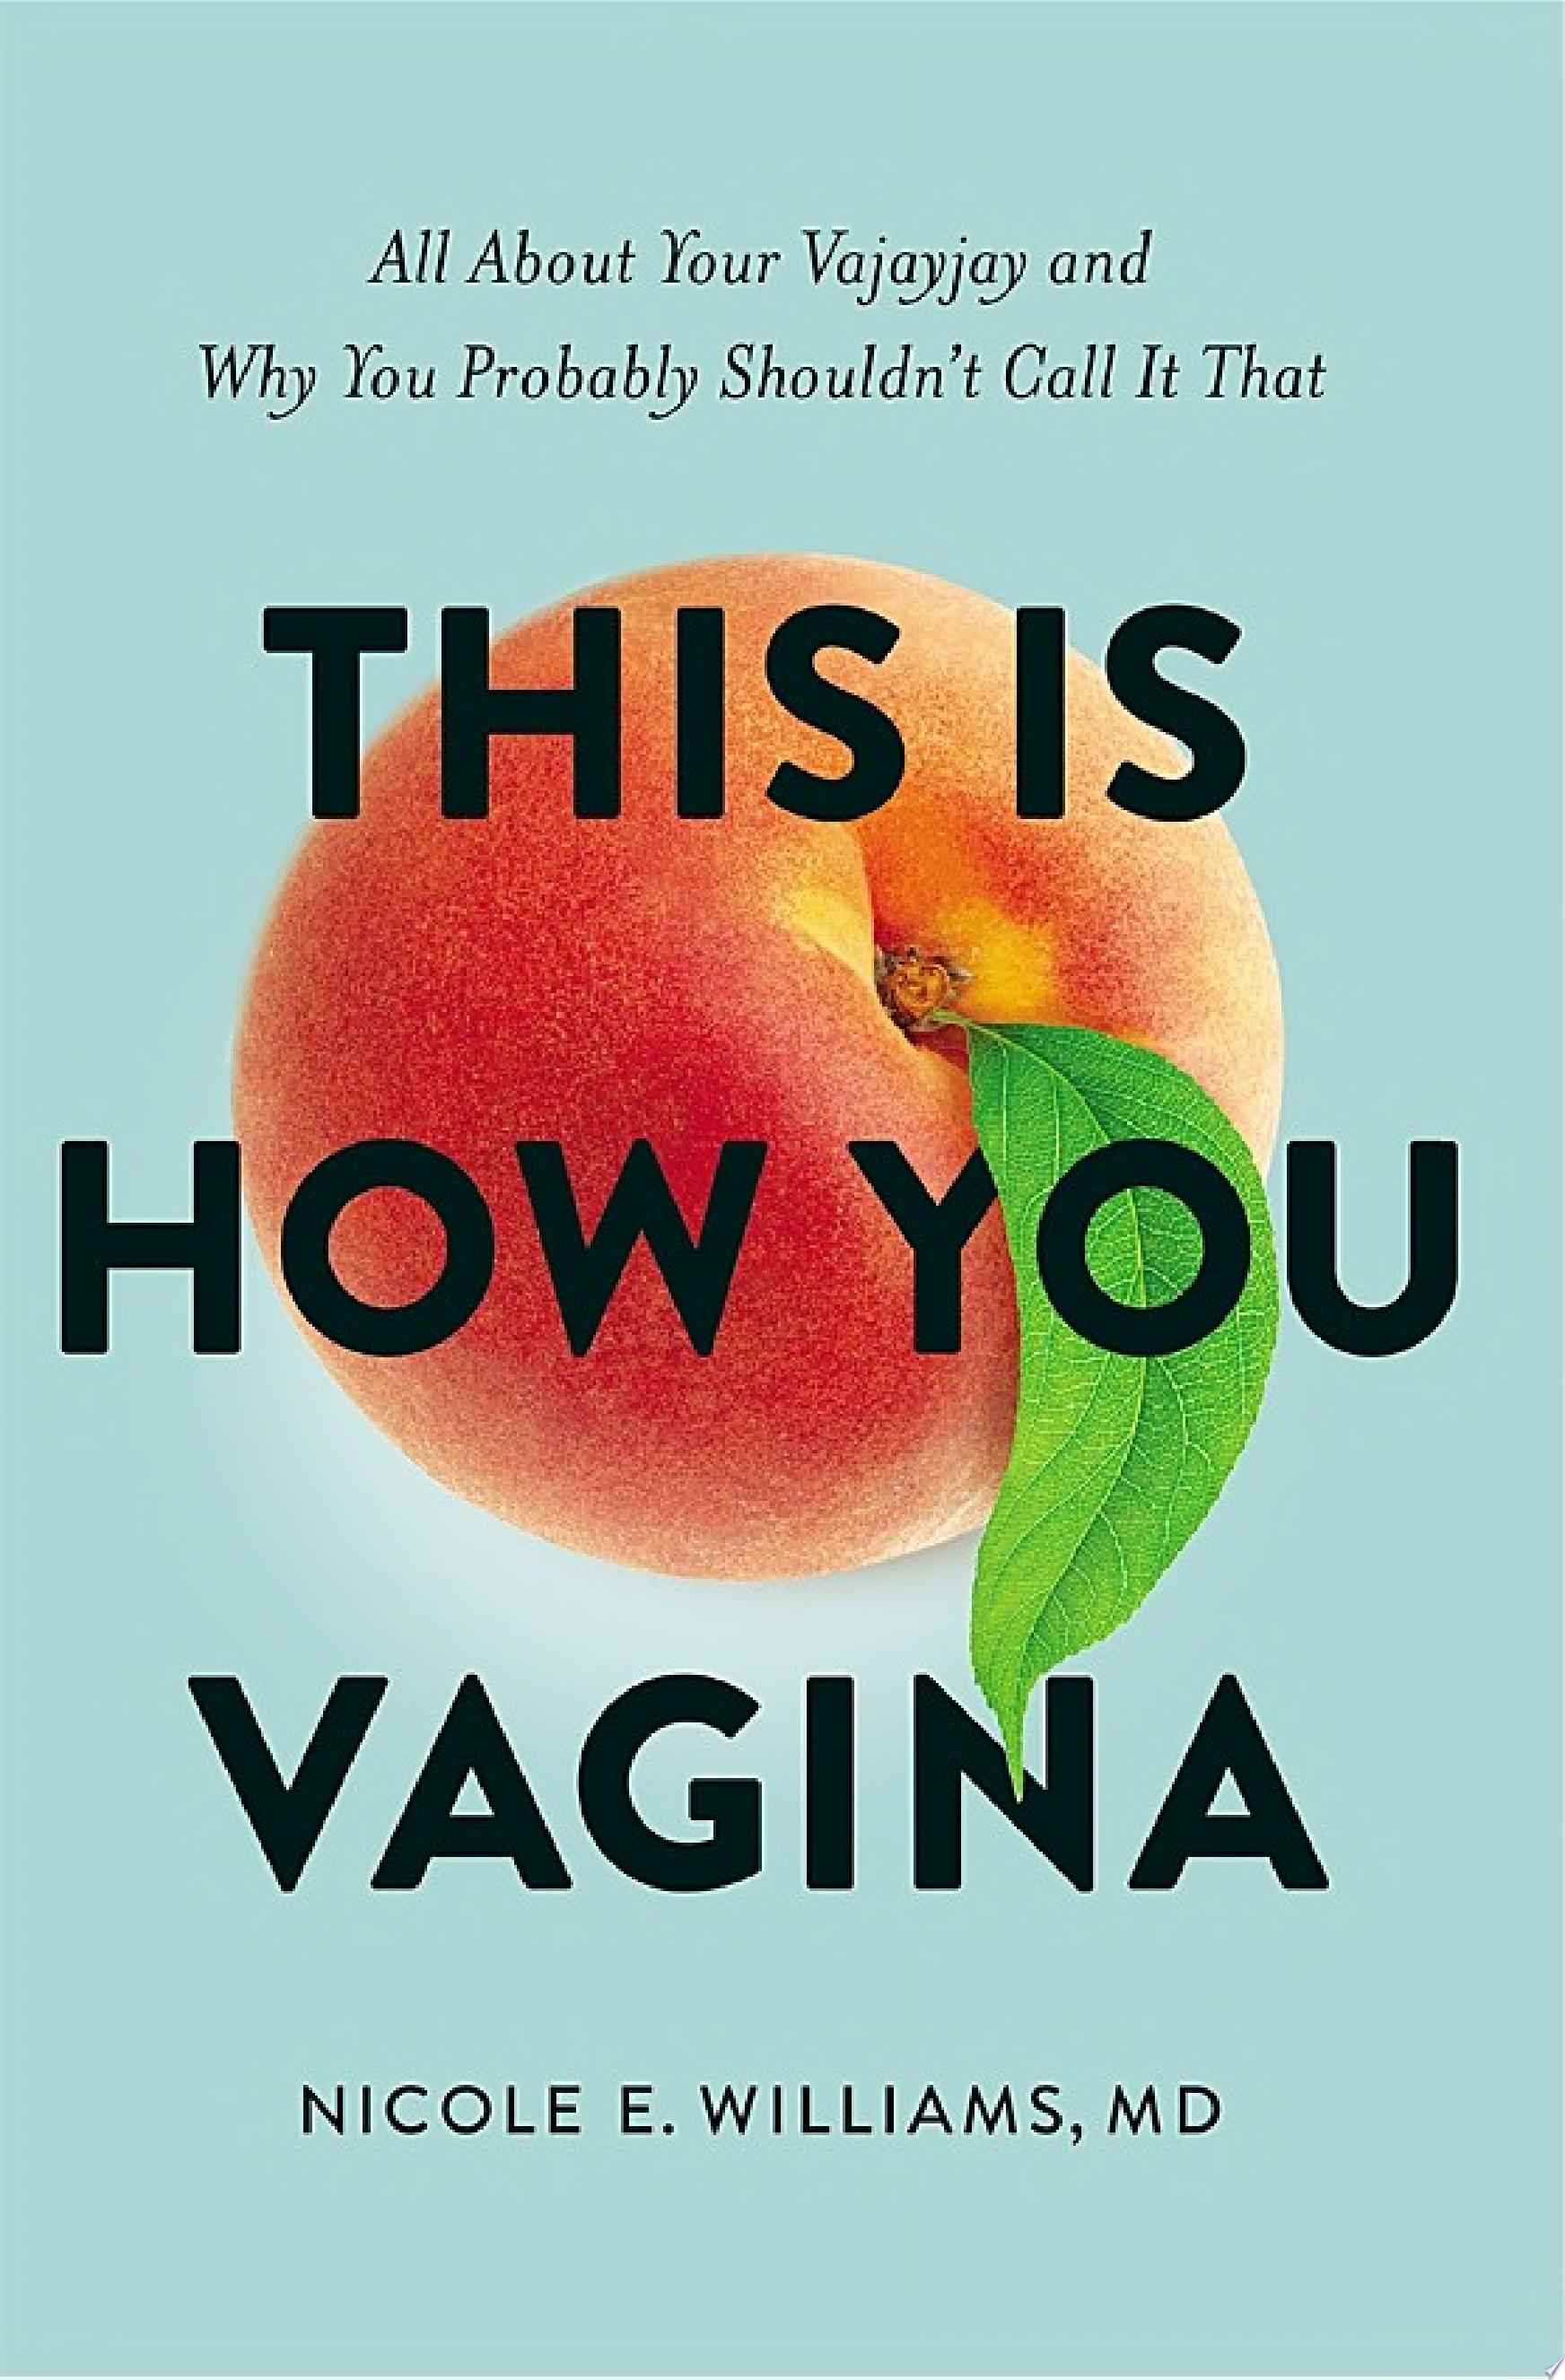 Image for "This is How You Vagina"